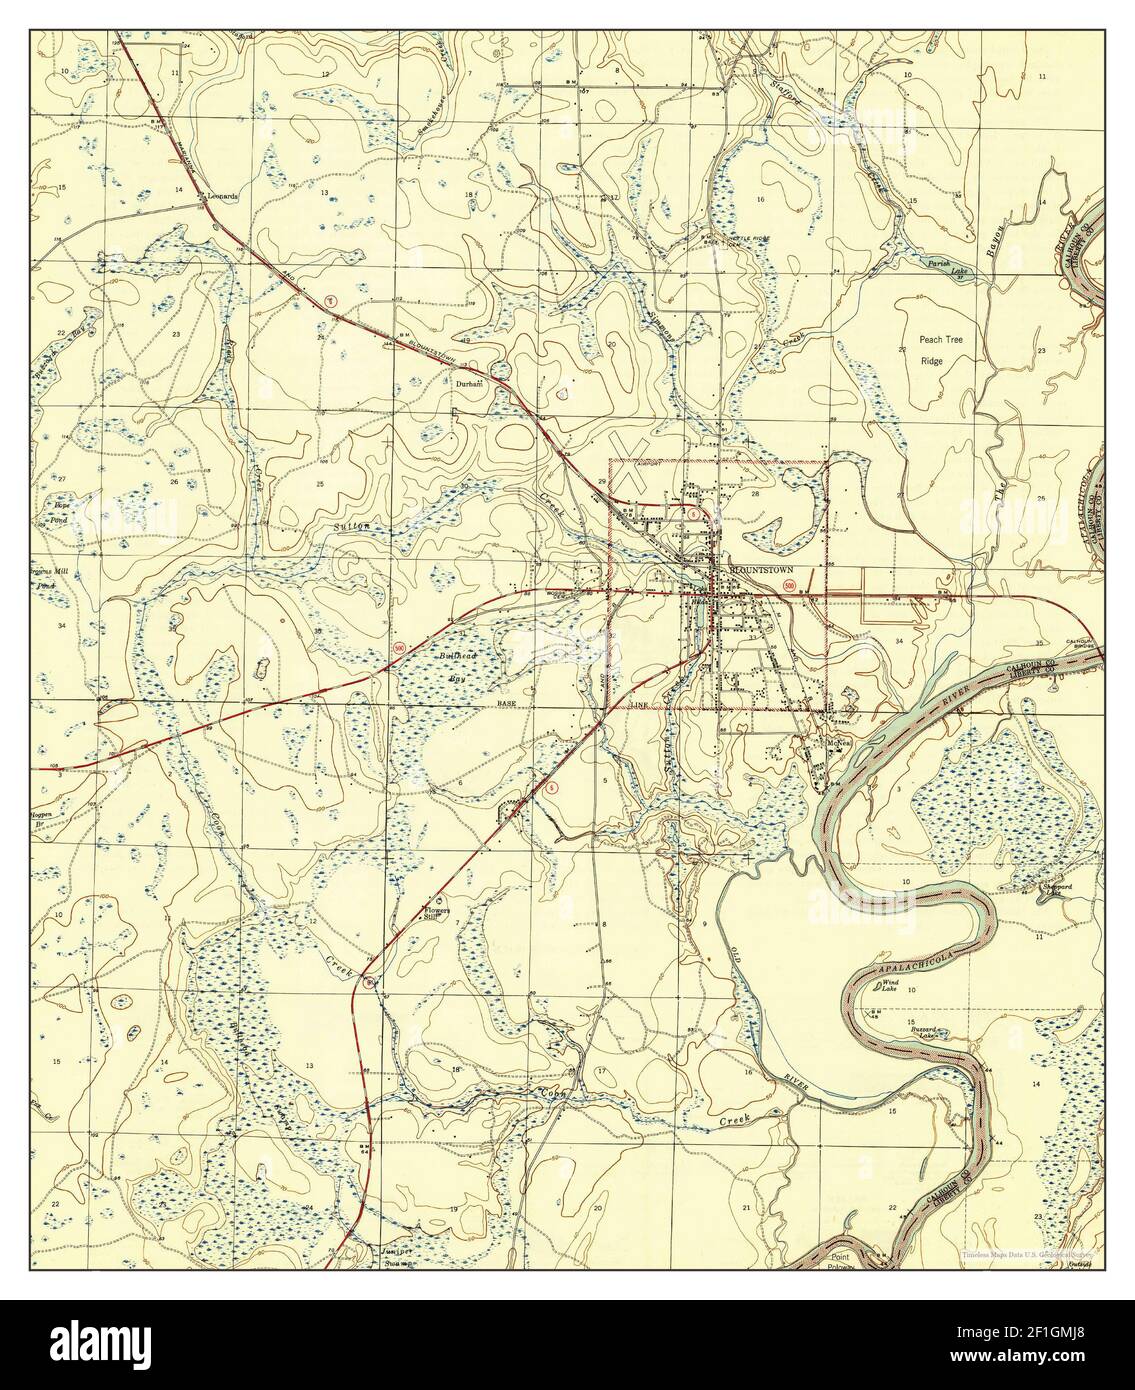 Blountstown, Florida, map 1945, 1:31680, United States of America by Timeless Maps, data U.S. Geological Survey Stock Photo